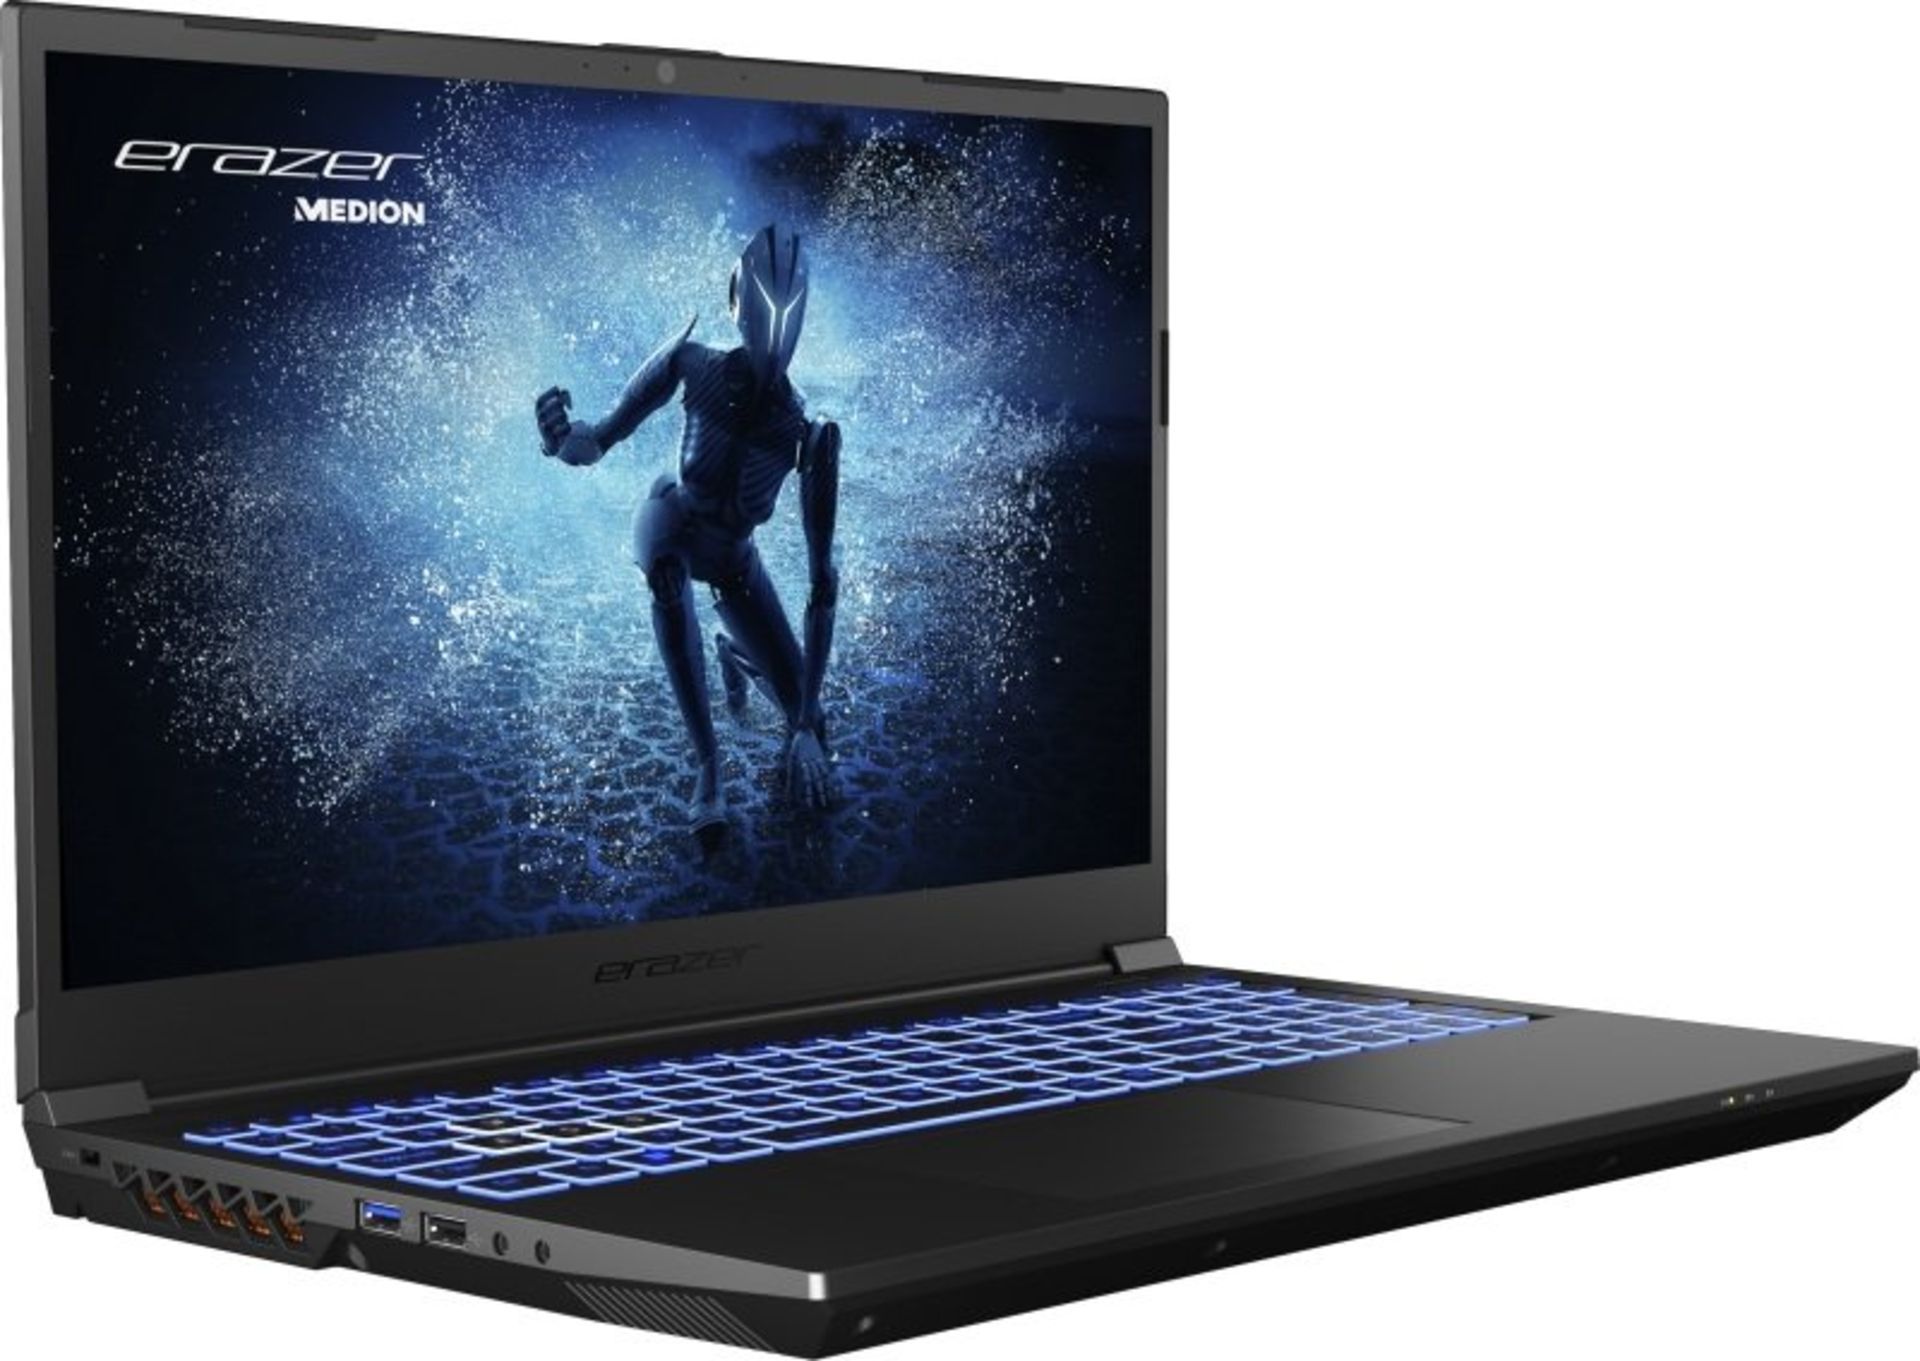 NEW & BOXED MEDION Erazer Deputy P50 - MD 62533 Gaming Laptop. RRP £1306.66. Intel Core i7-12700H, - Image 2 of 6